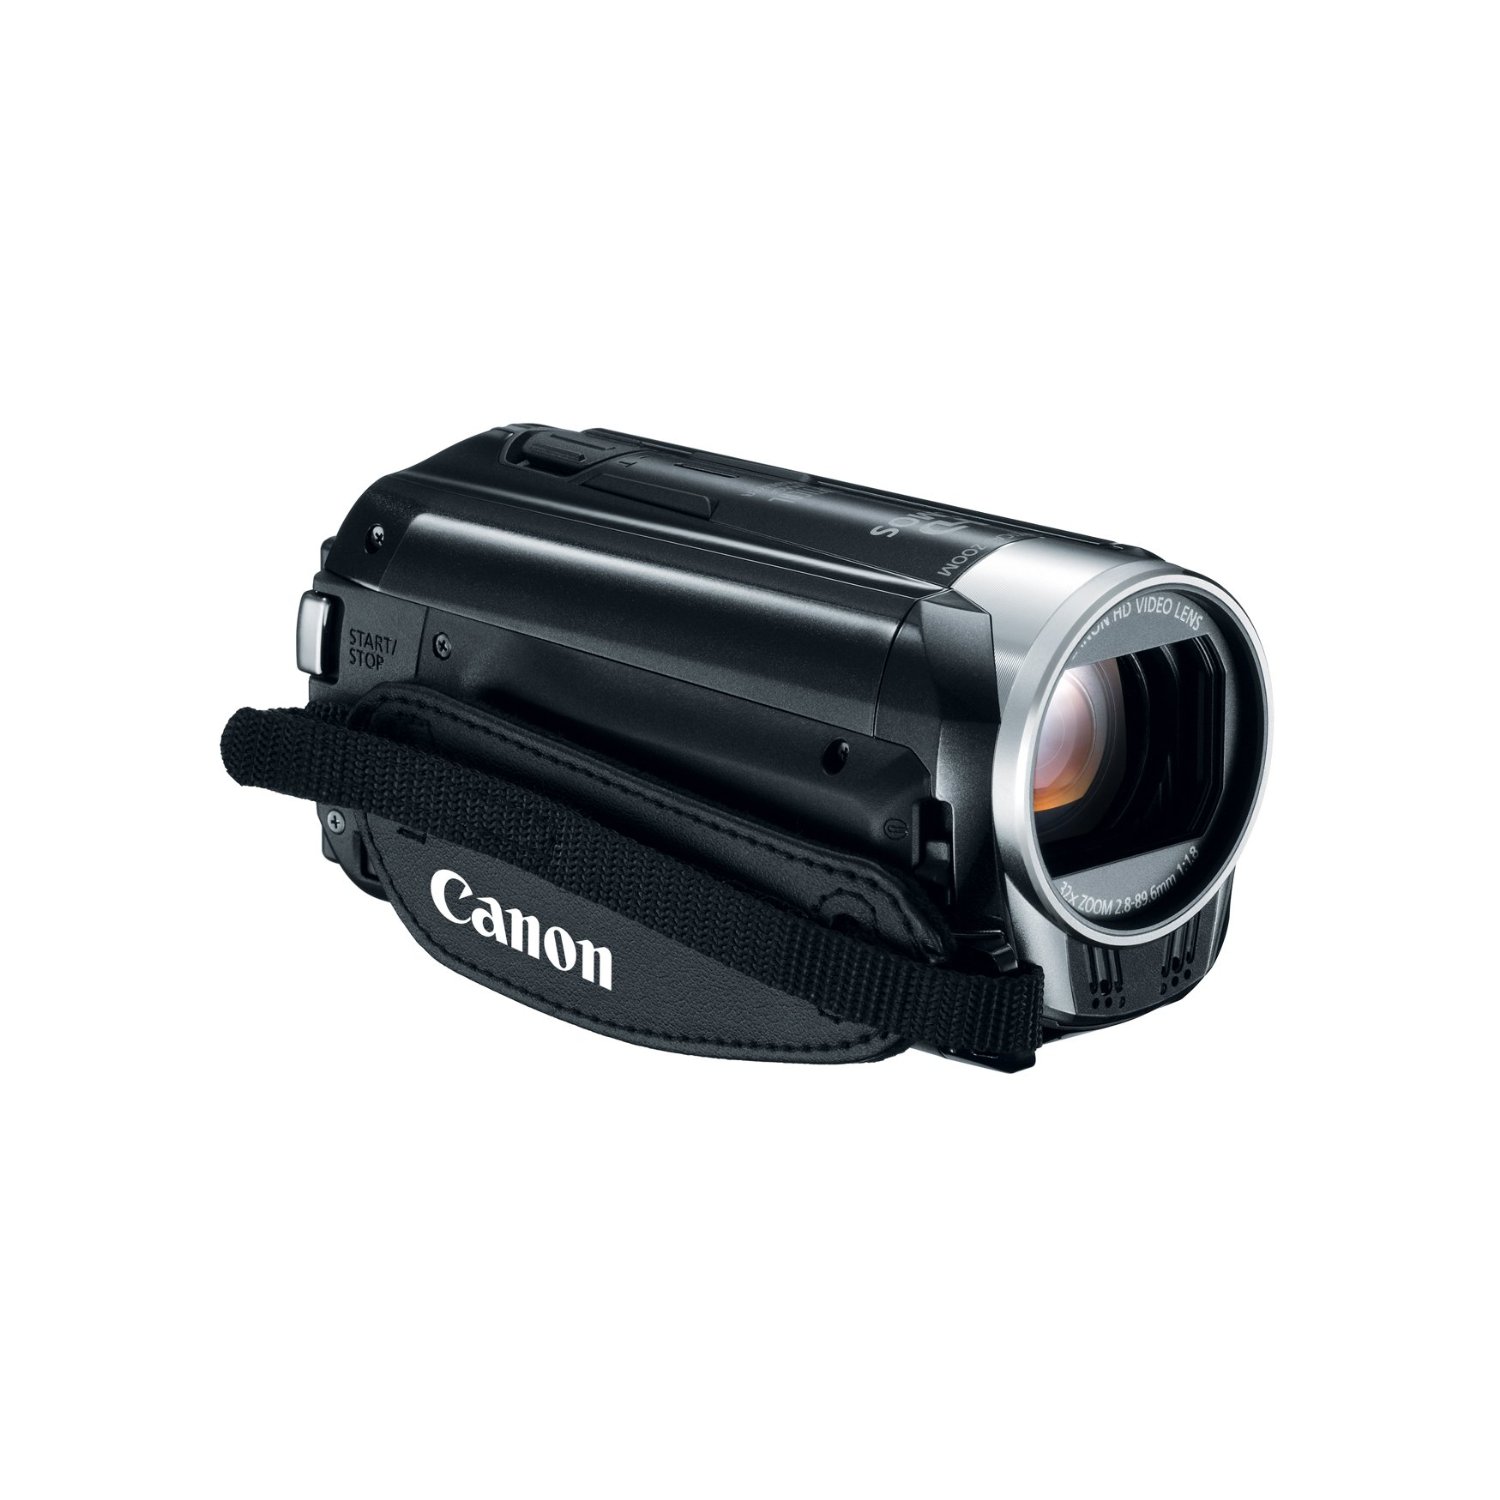 http://thetechjournal.com/wp-content/uploads/images/1202/1328098403-canon-vixia-hf-r300-full-hd-51x-image-stabilized-optical-zoom-camcorder-8.jpg